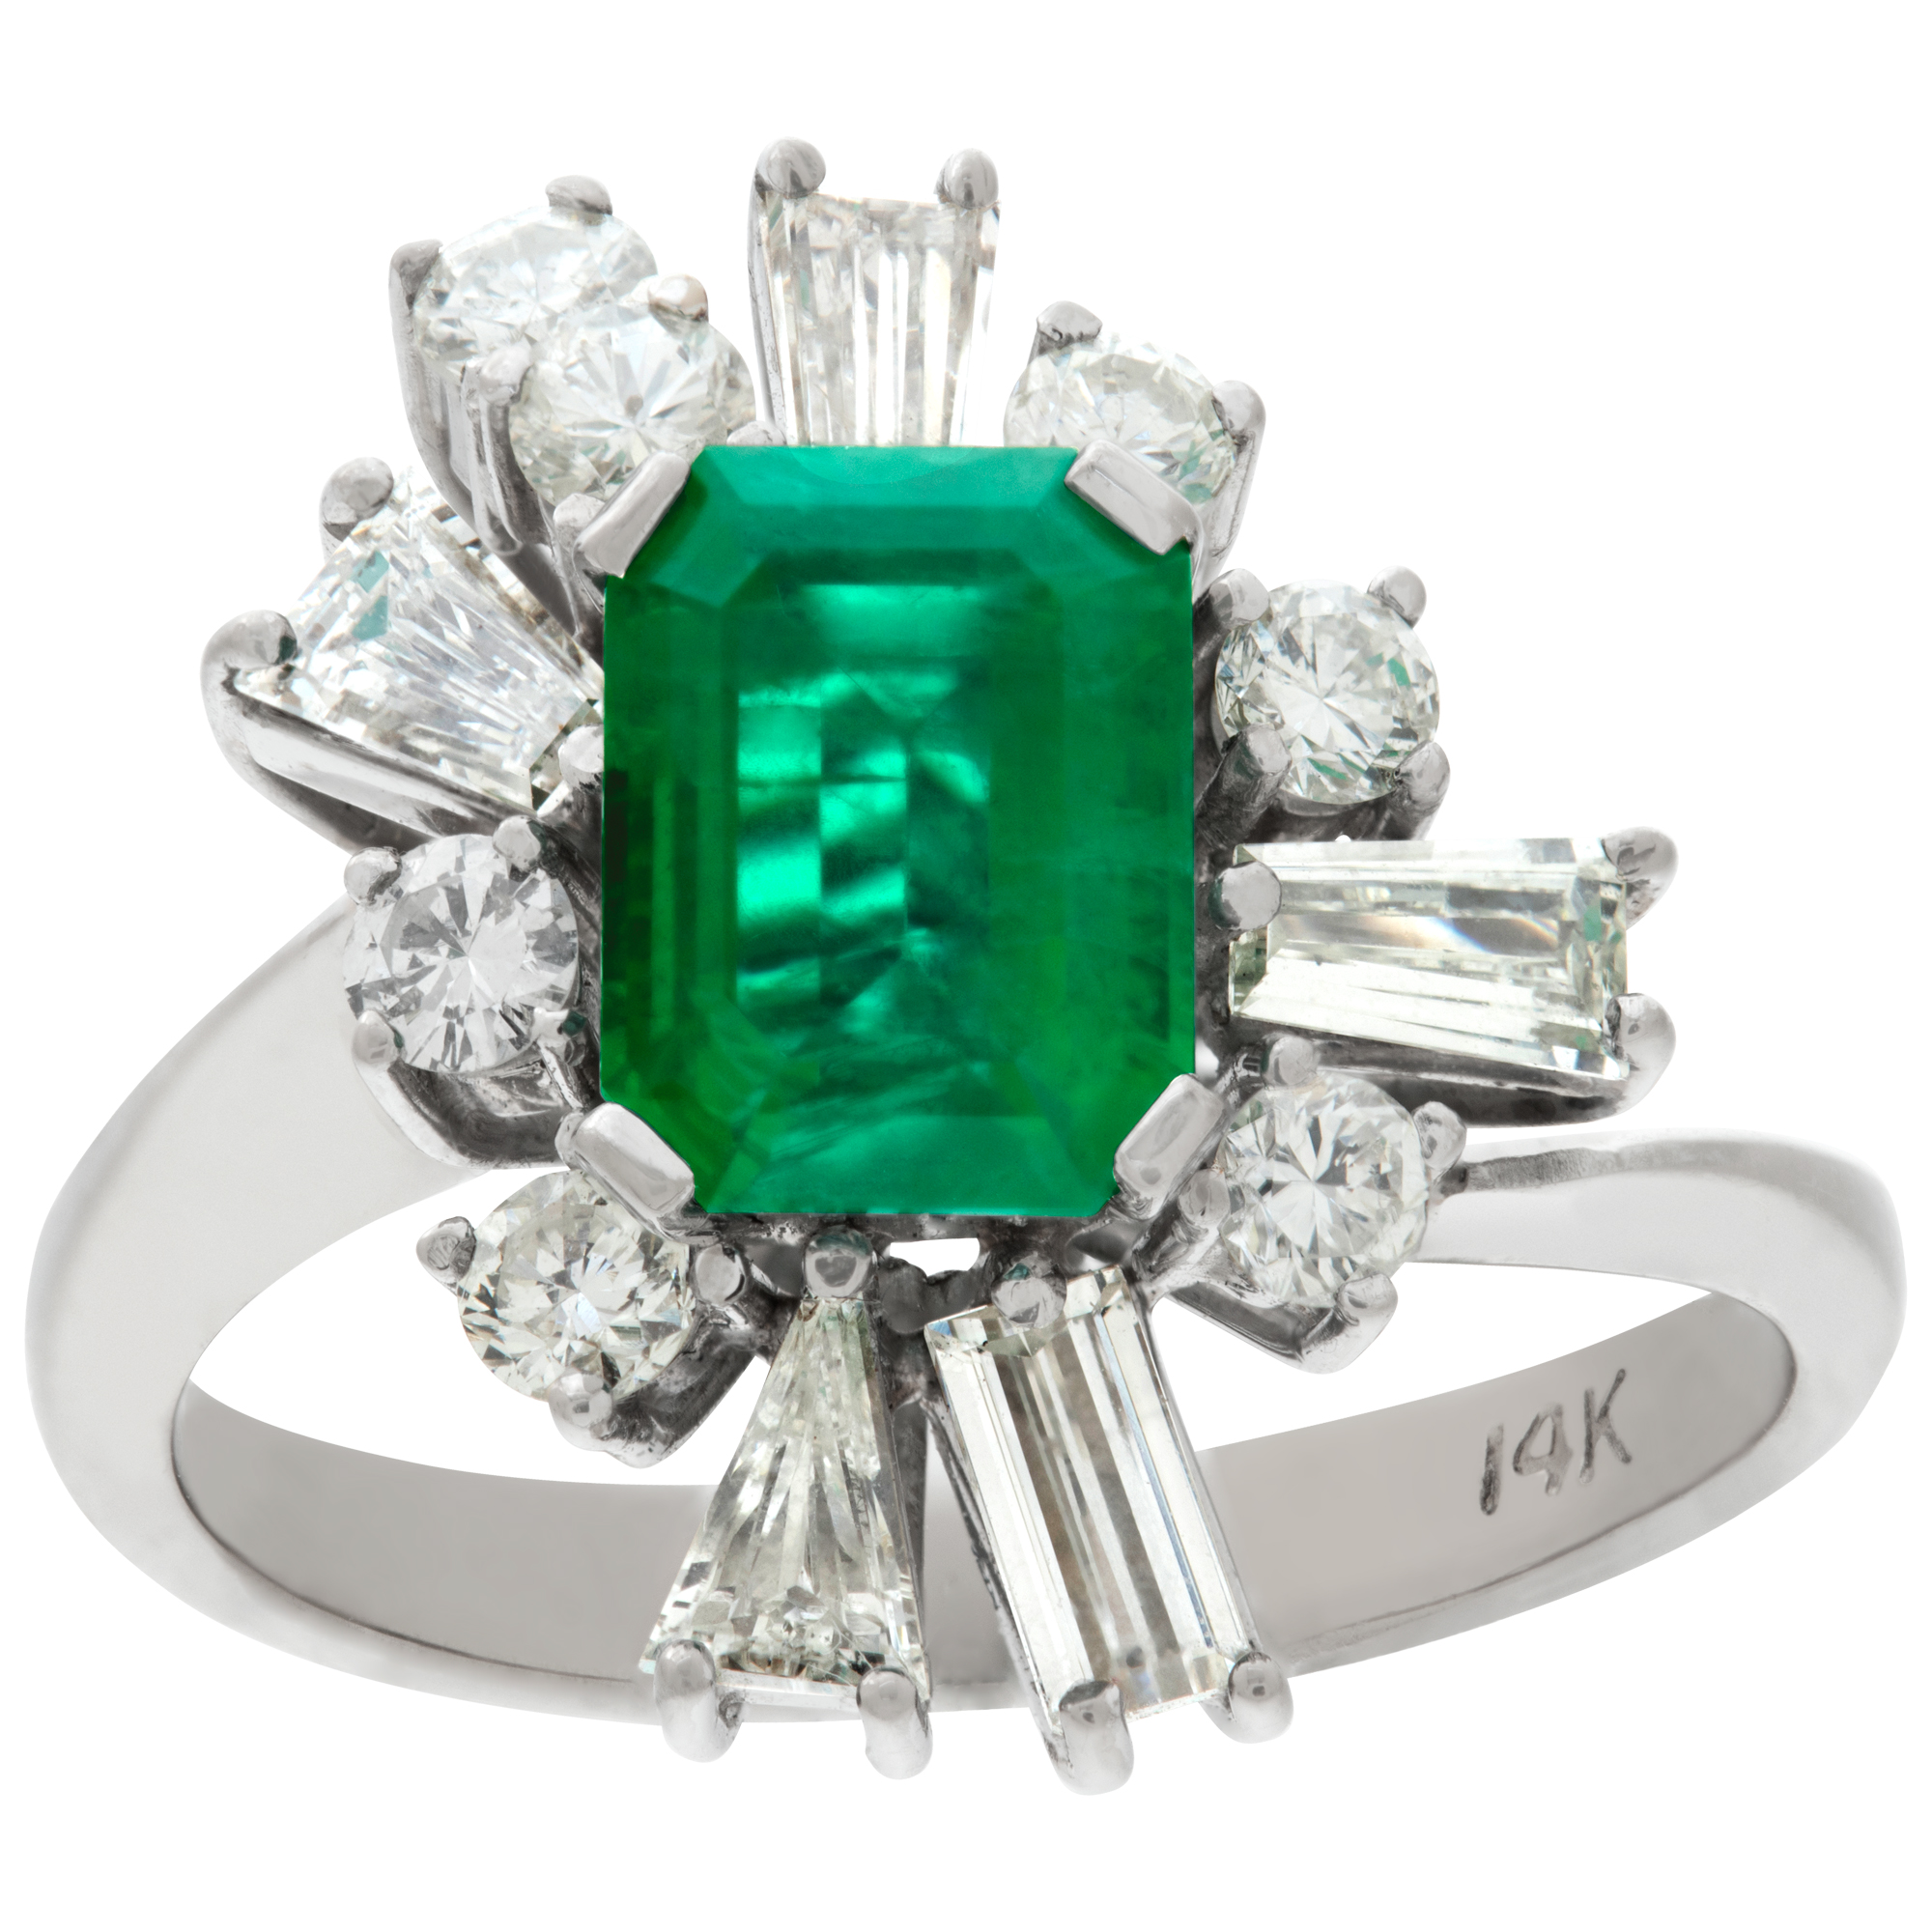 Emerald and diamond ring in 14k white gold. 1.00 carats in diamonds. Size 6.75